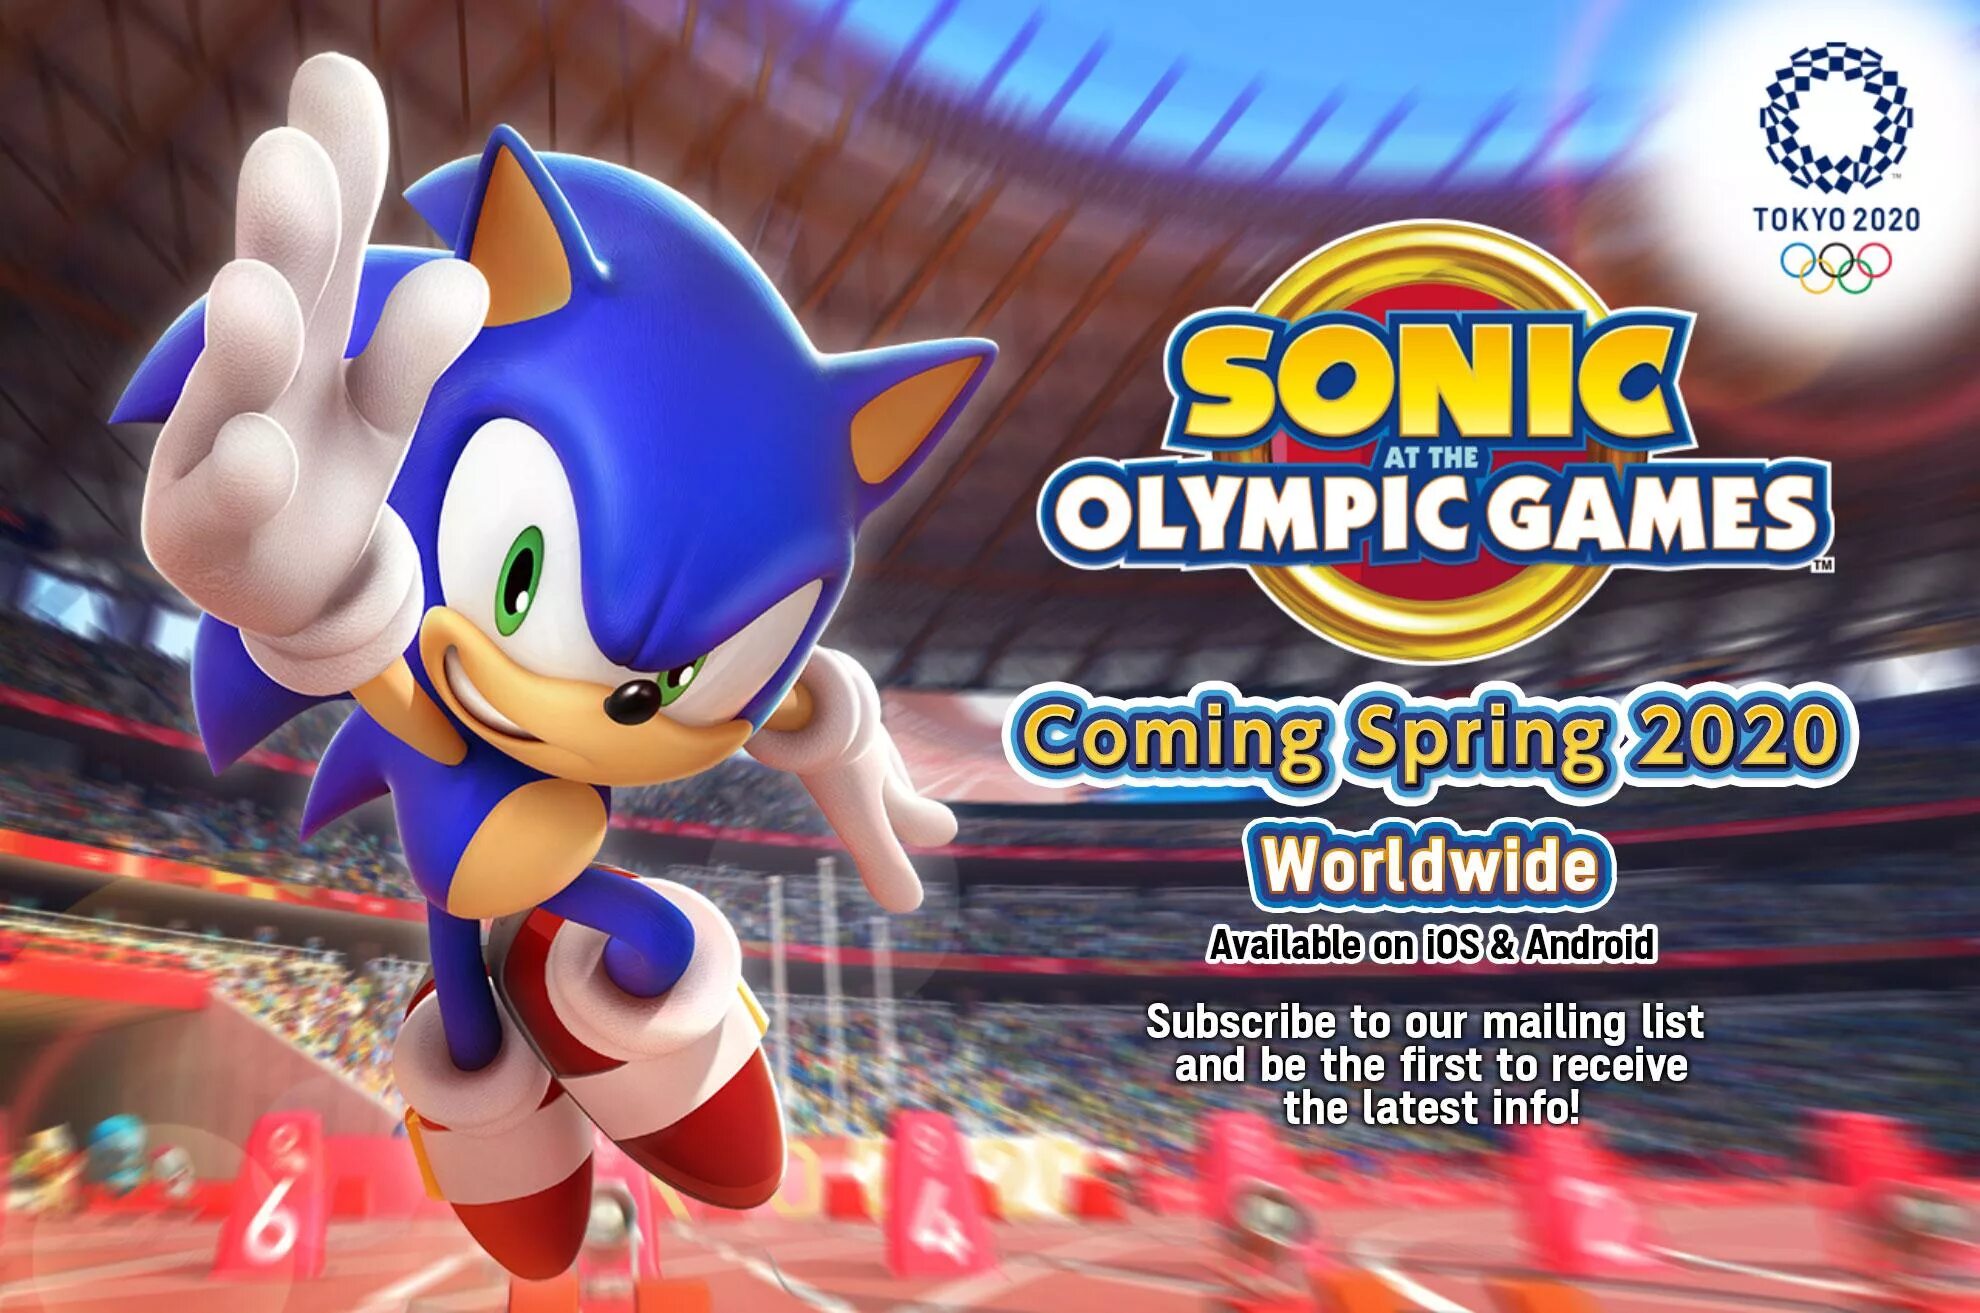 Sonic Mario 2020. Mario and Sonic at the Olympic games Tokyo 2020. Sonic Олимпийские игры. Sonic at the Olympic games (2020).